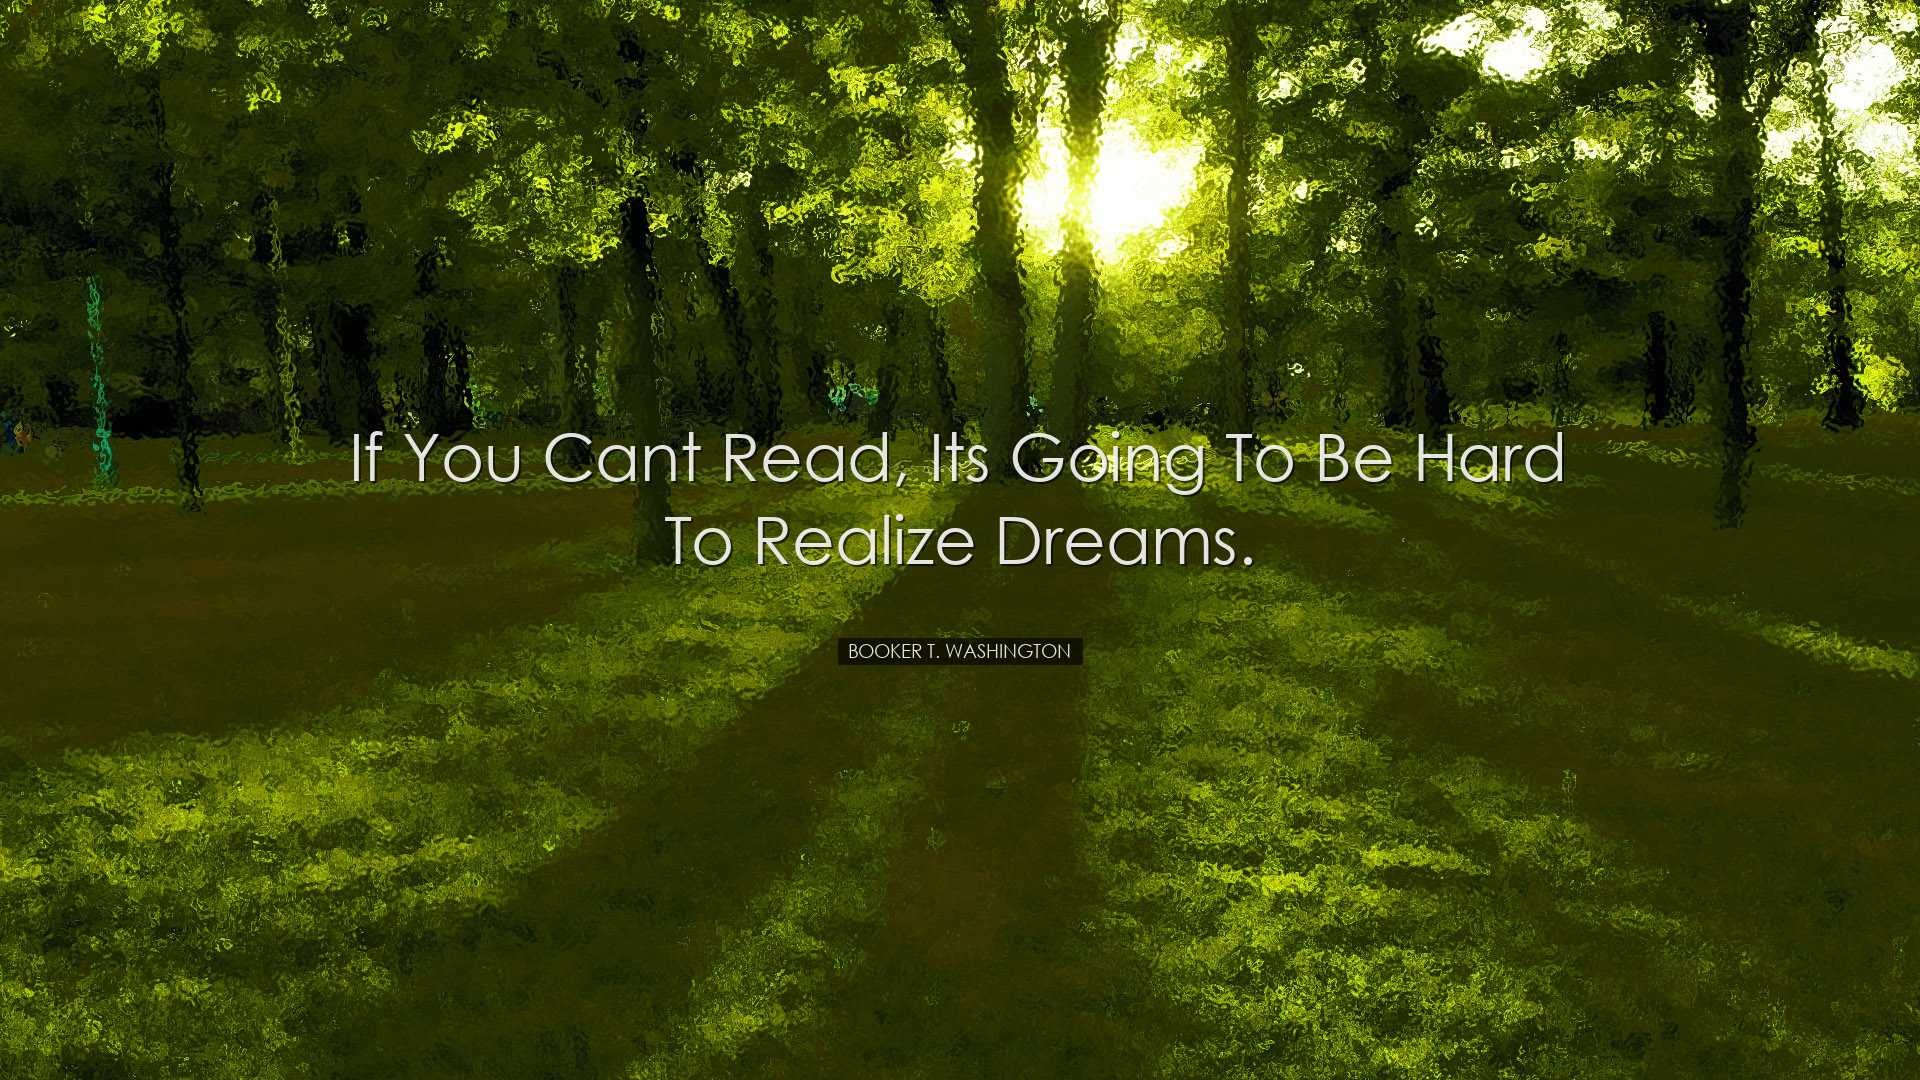 If you cant read, its going to be hard to realize dreams. - Booker